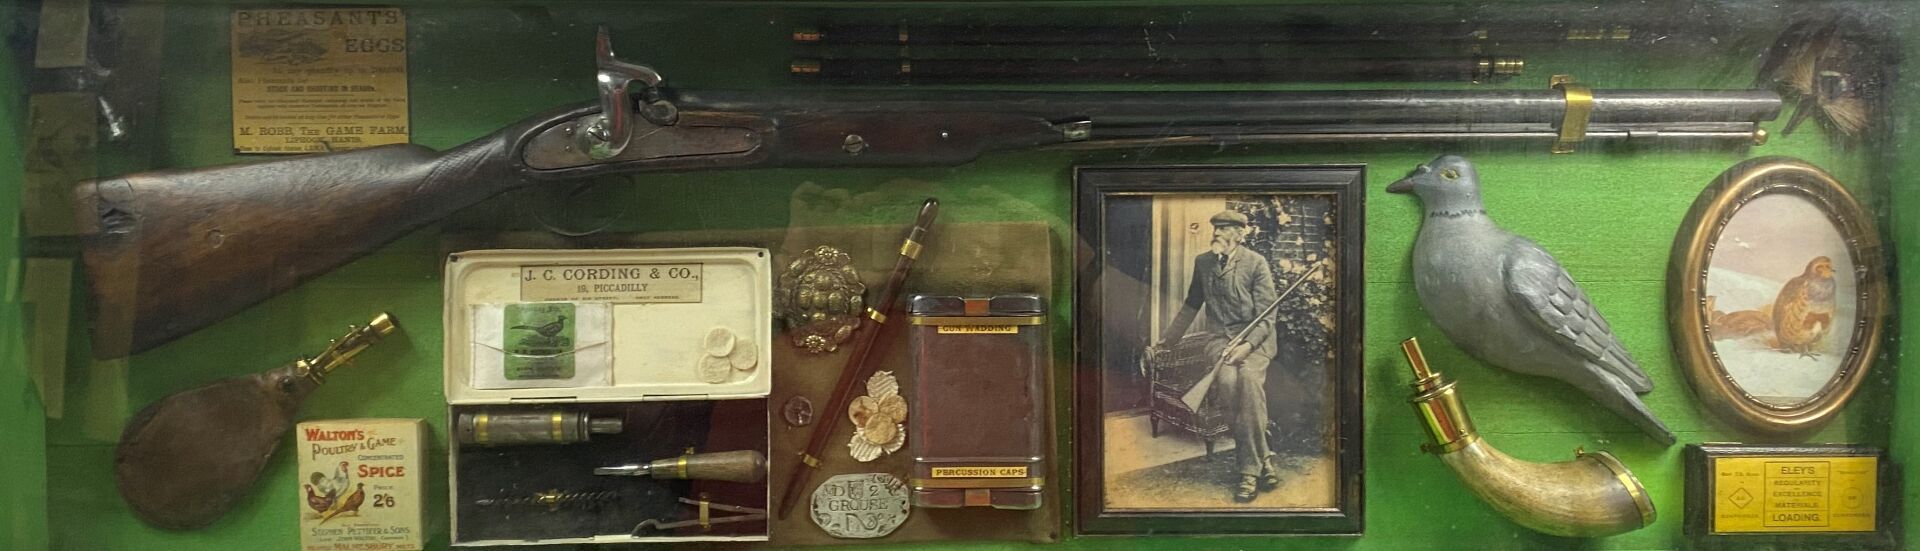 Null Hunting souvenirs in a frame under glass including a percussion rifle, powd&hellip;